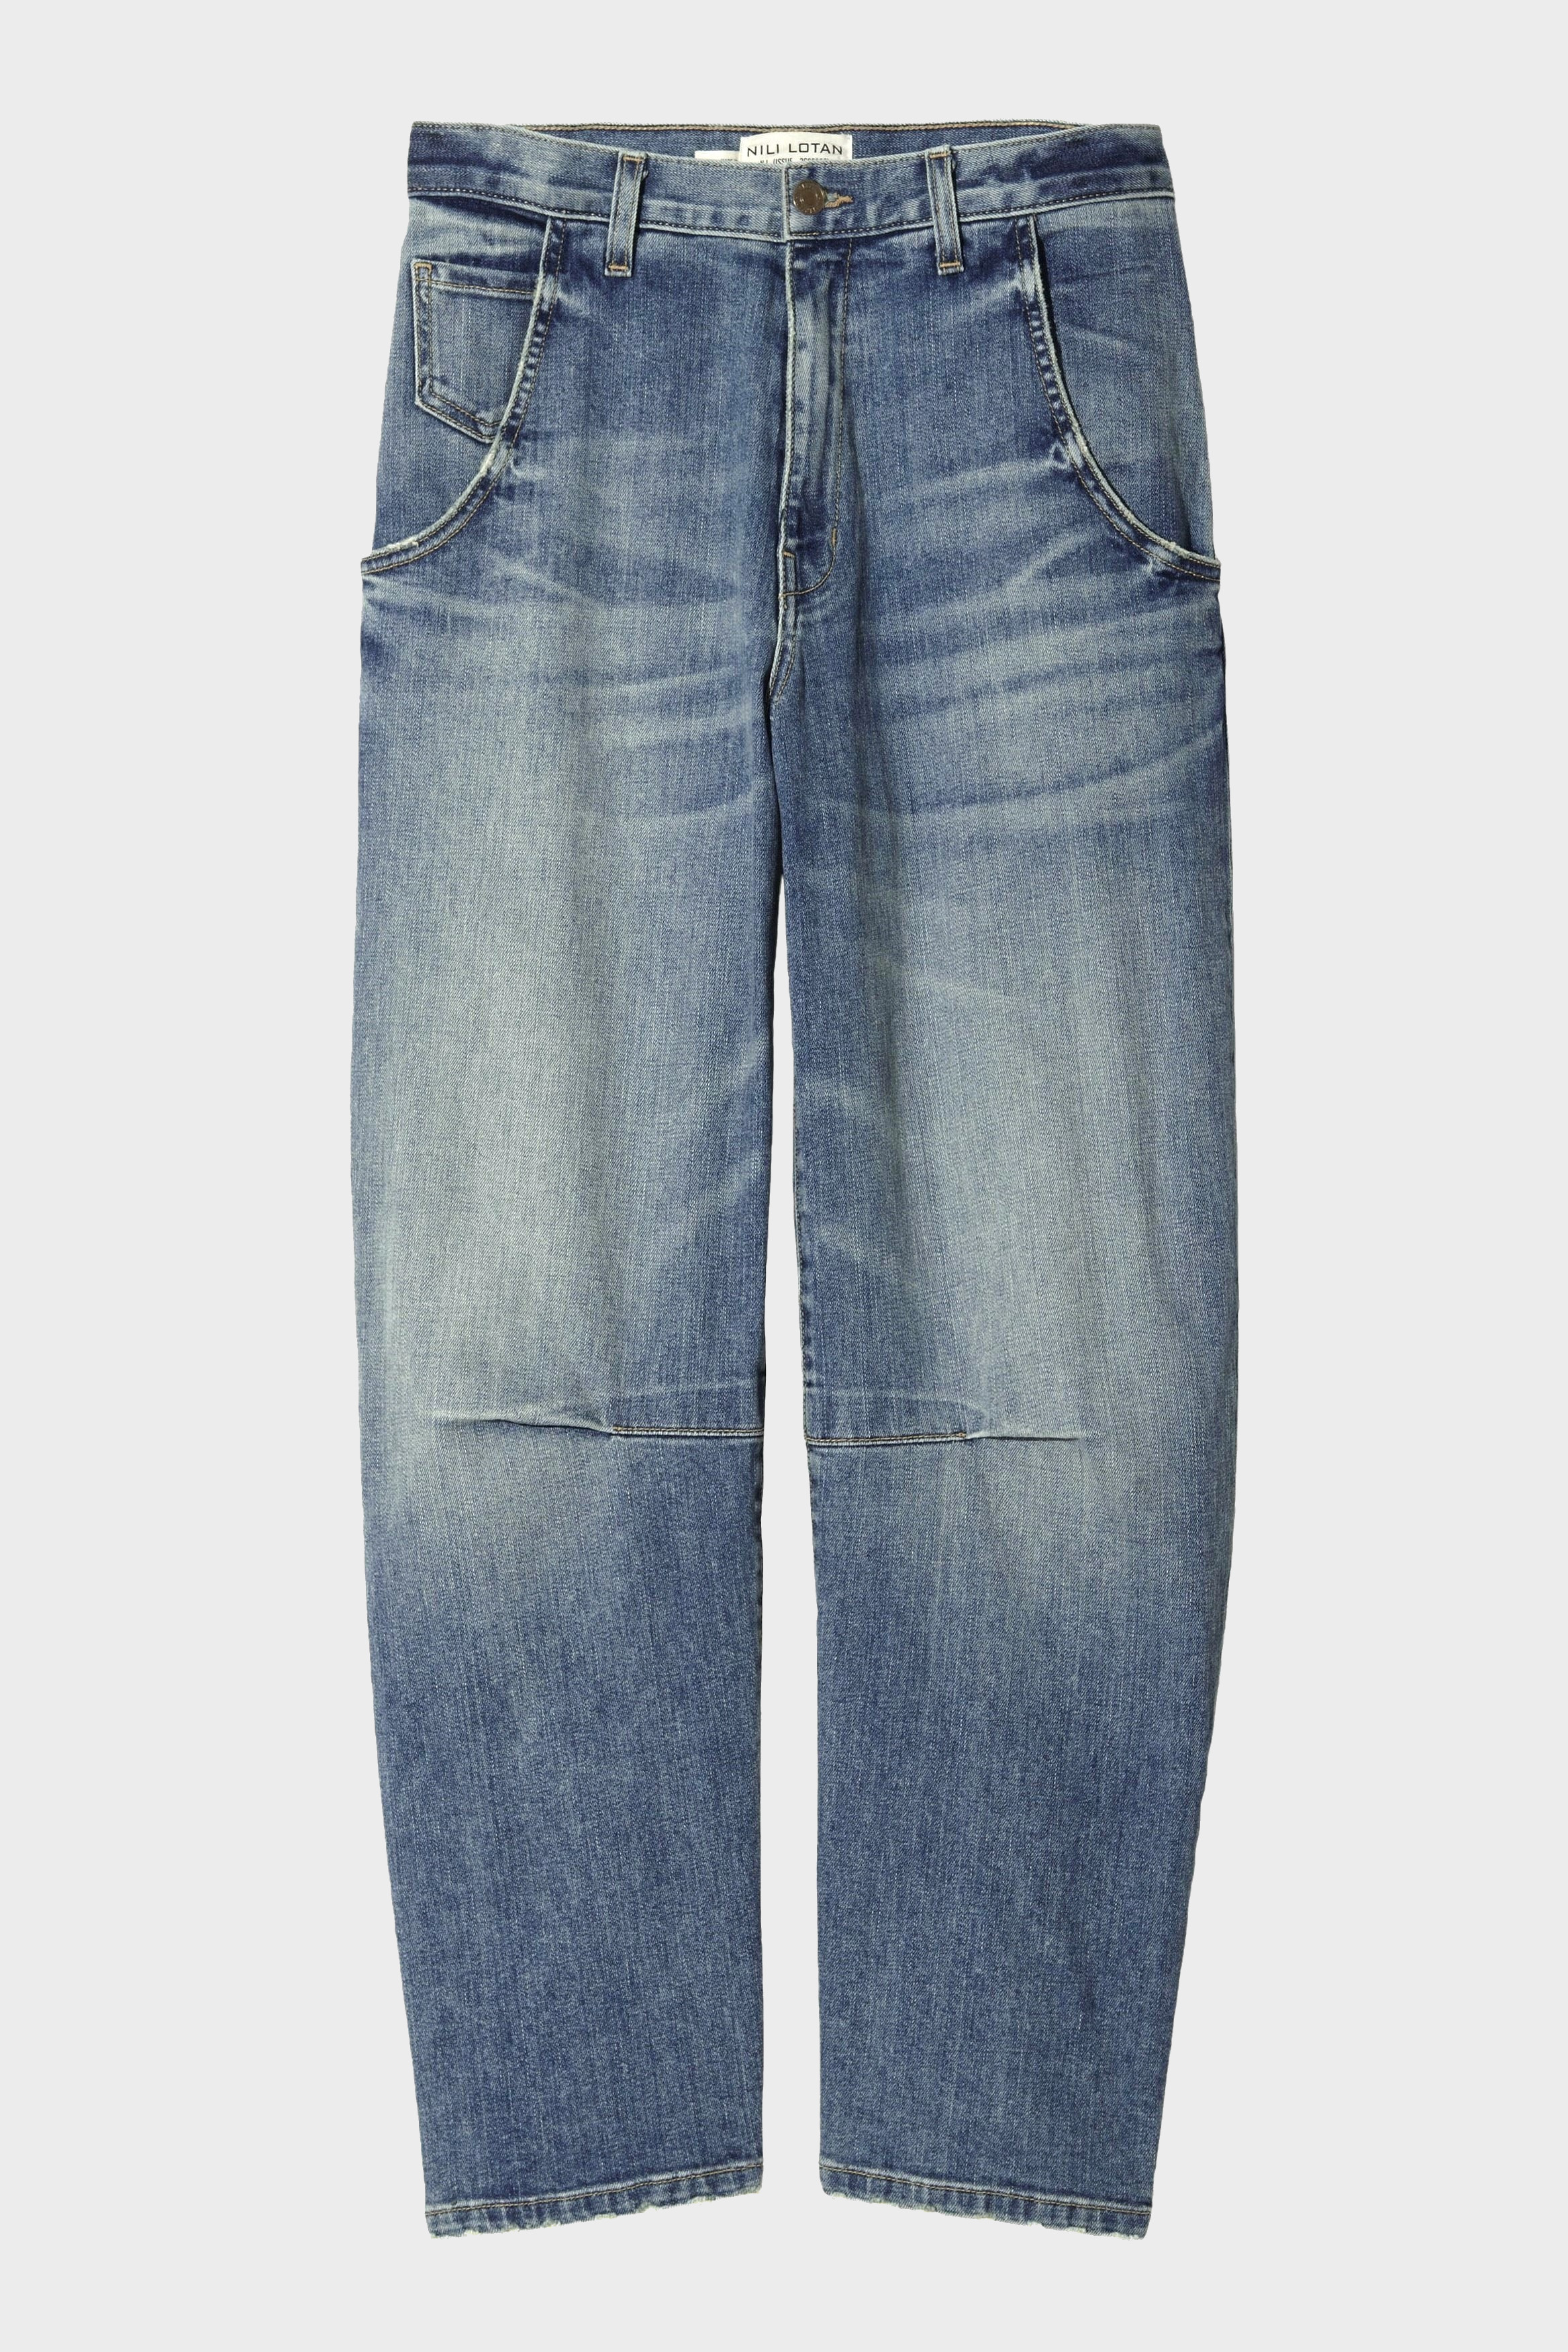 Nili Lotan Emerson Jeans in Classic Washed